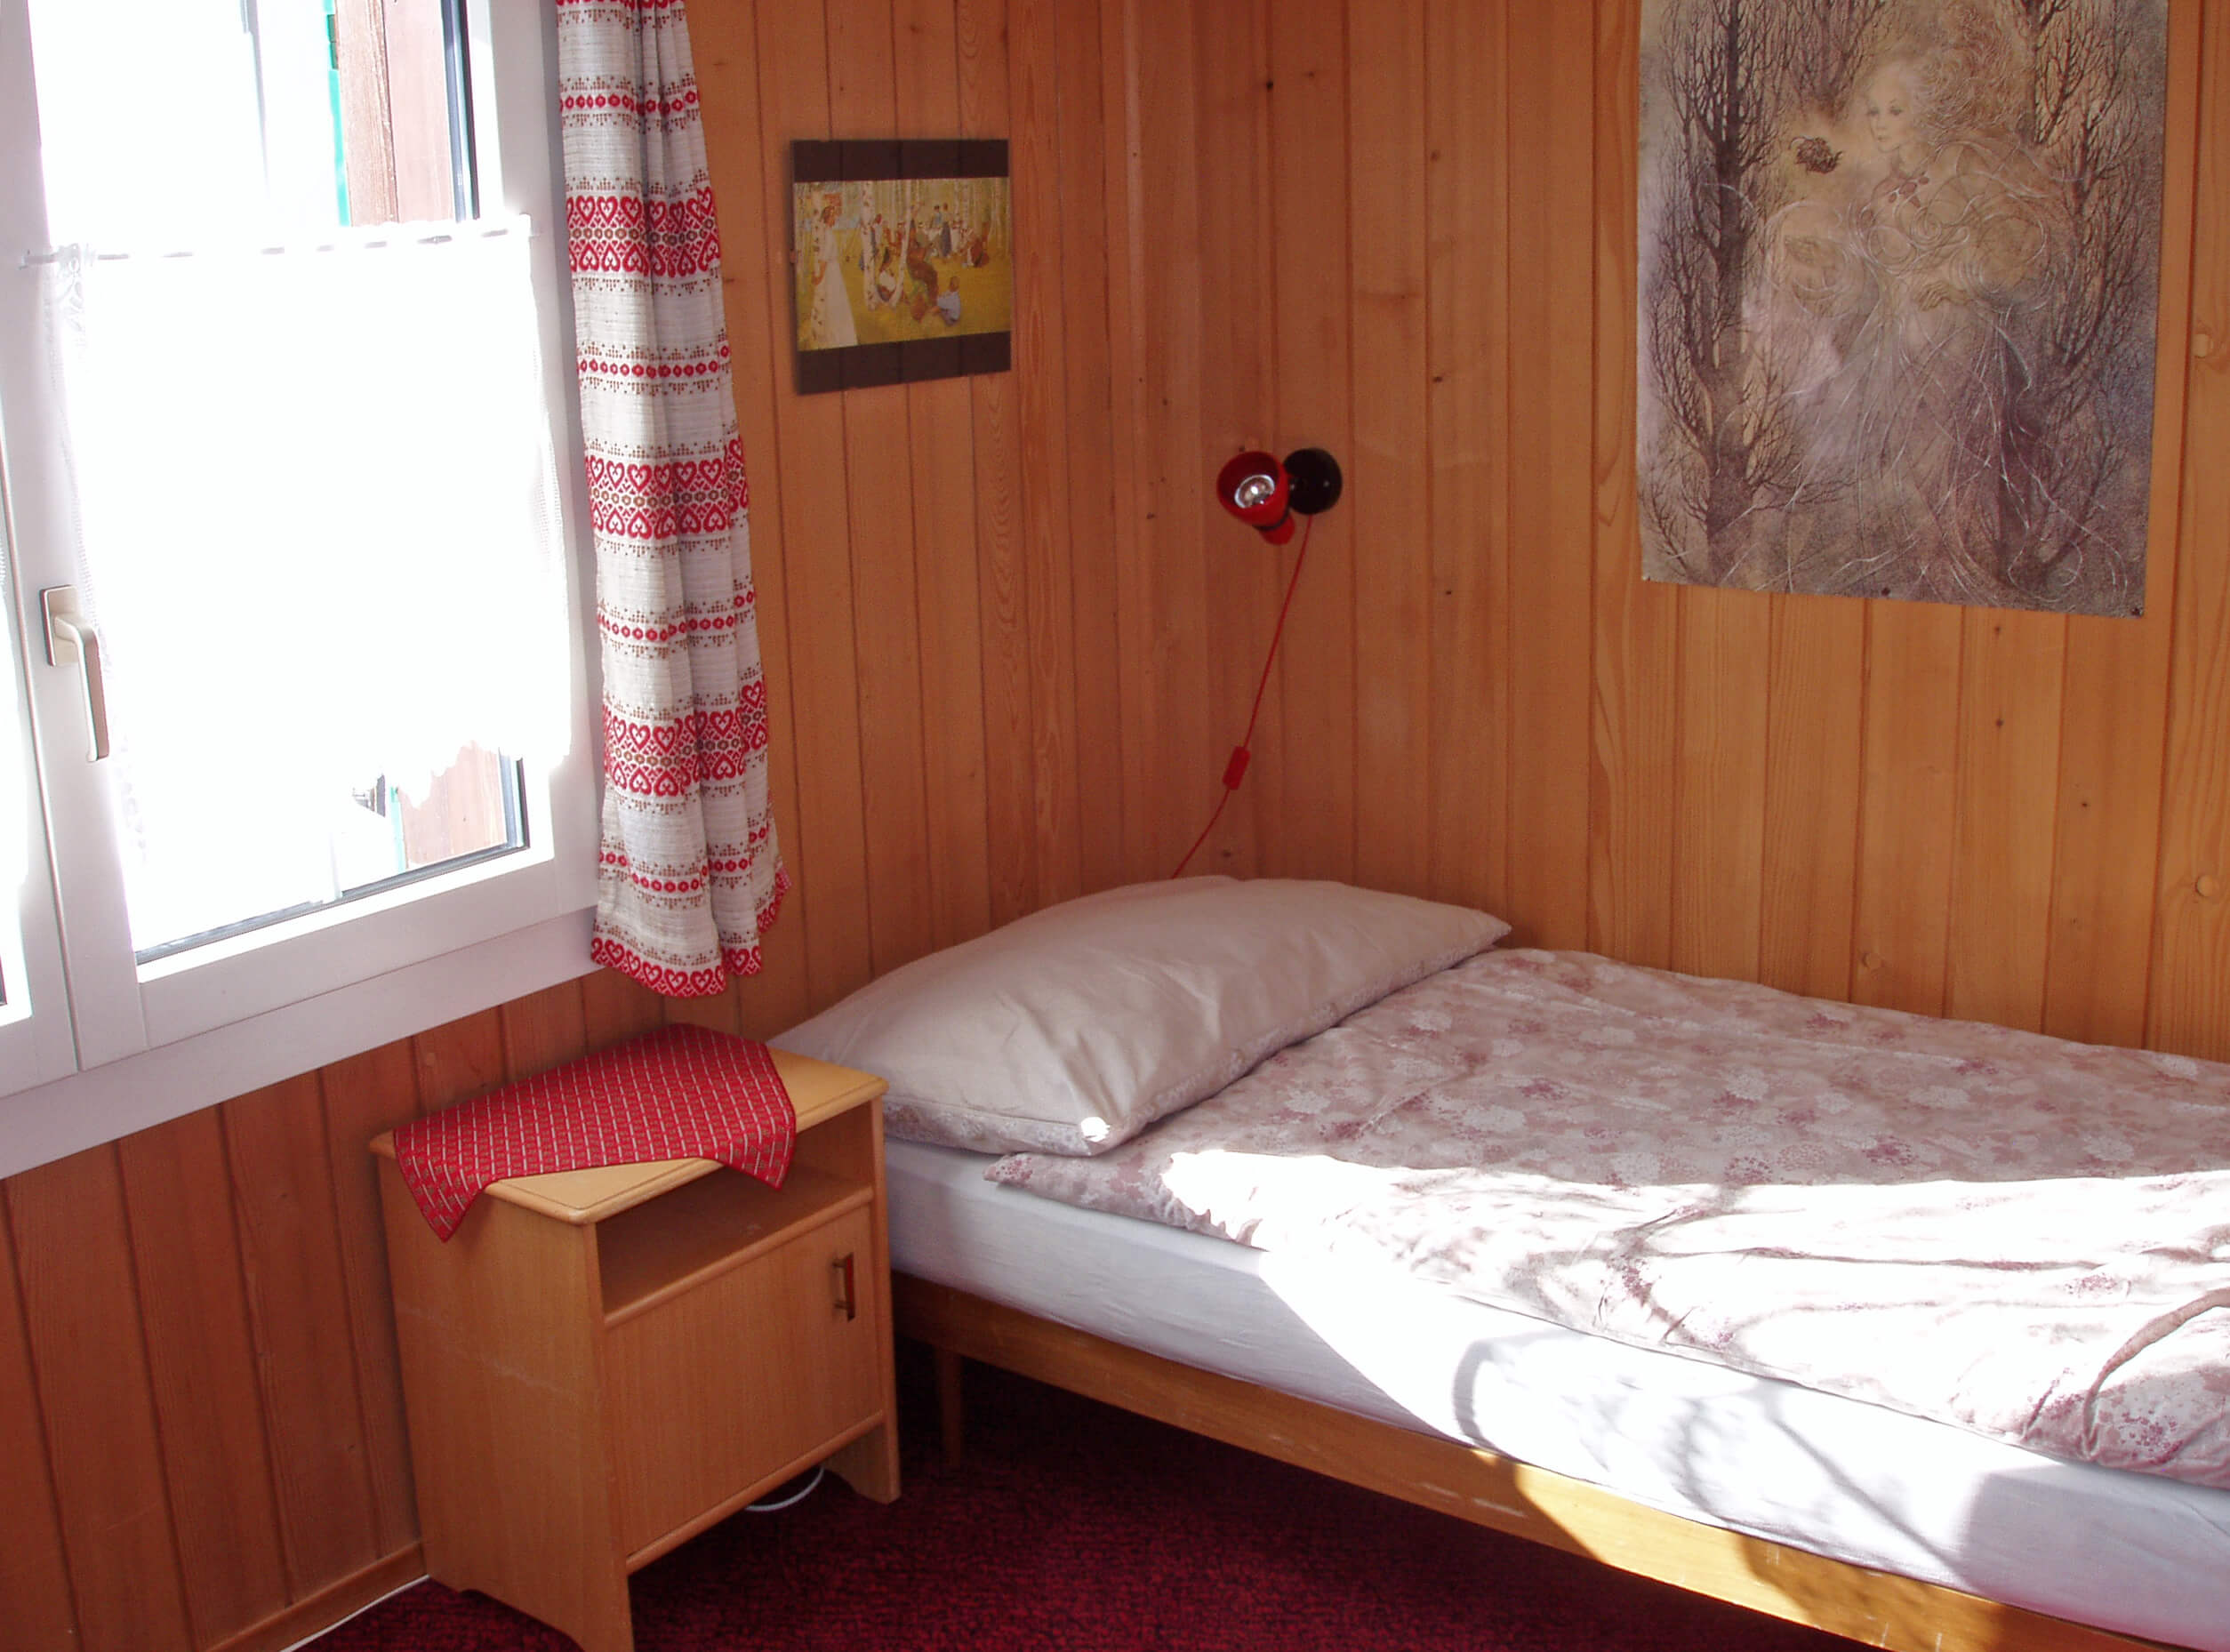 Bedroom with single bed by the window